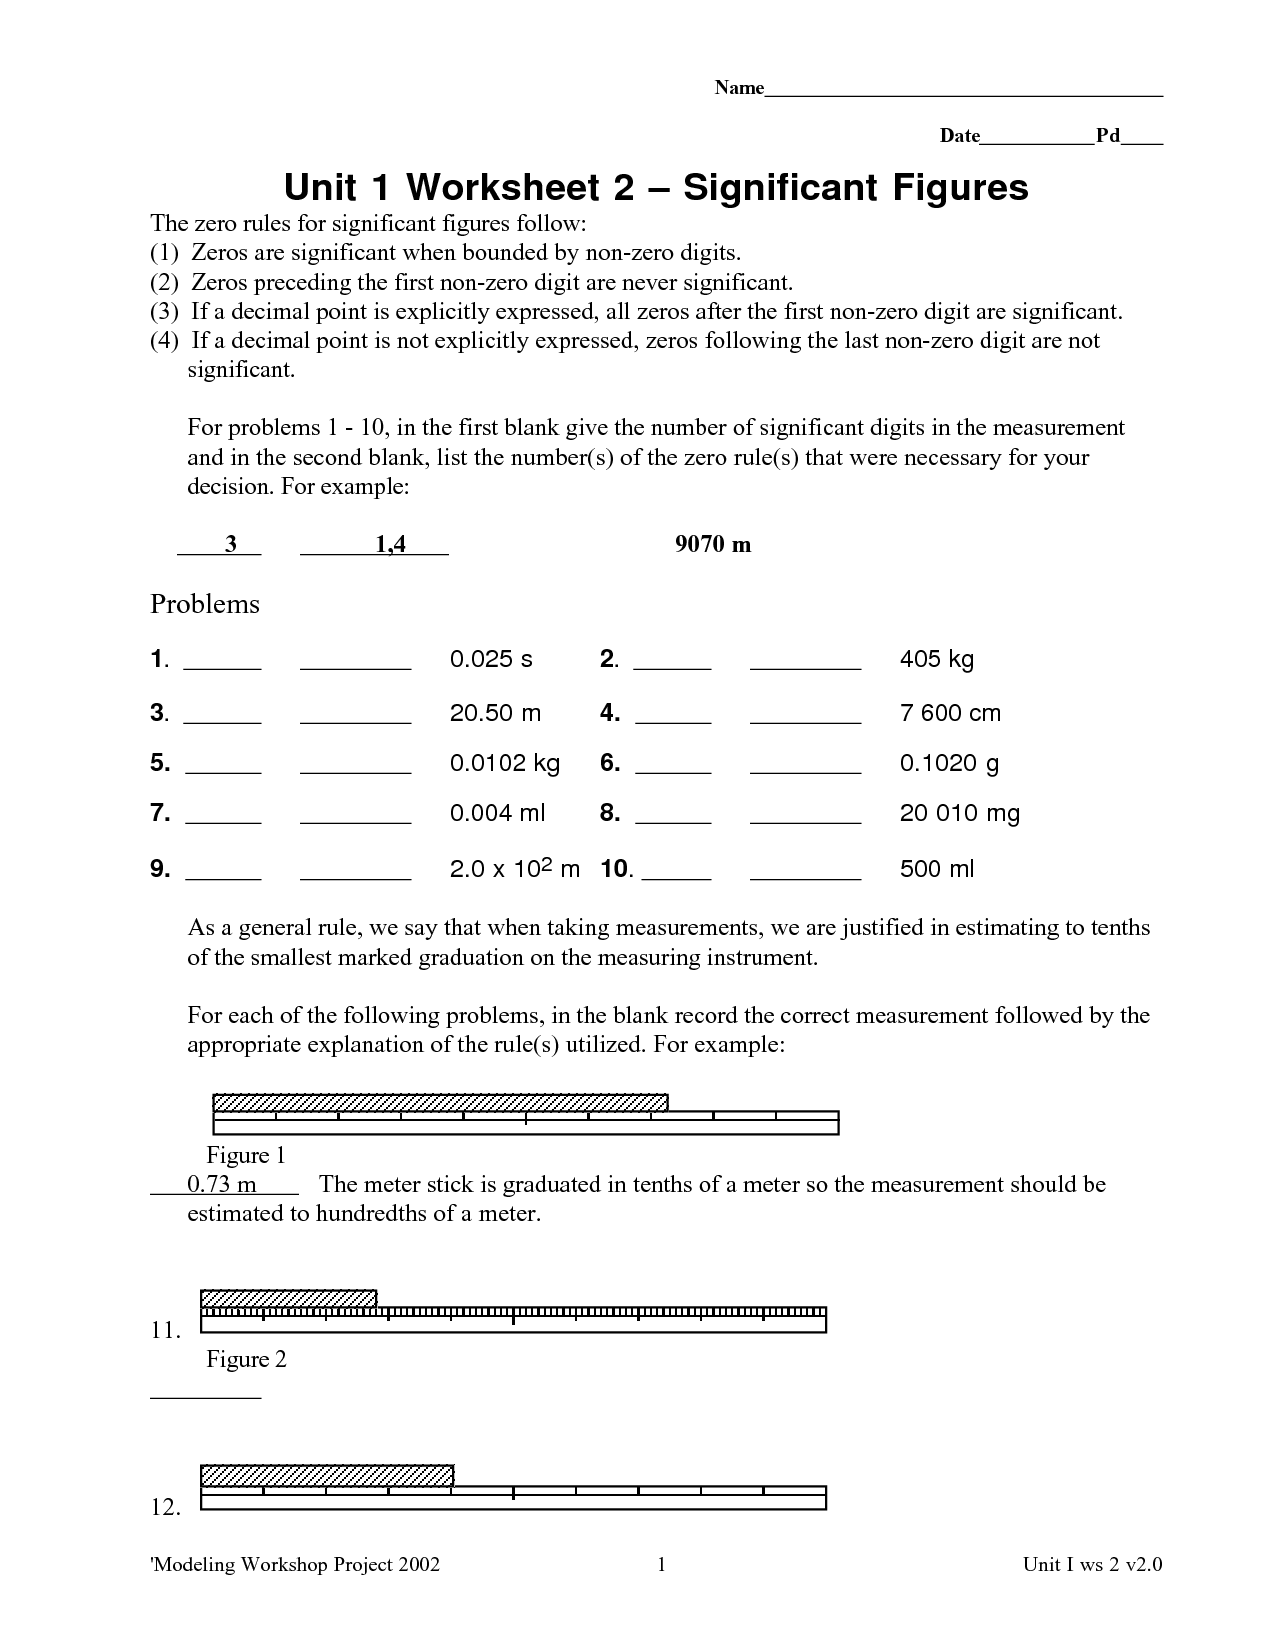 10-best-images-of-chemistry-significant-figures-worksheet-significant-figures-worksheet-and